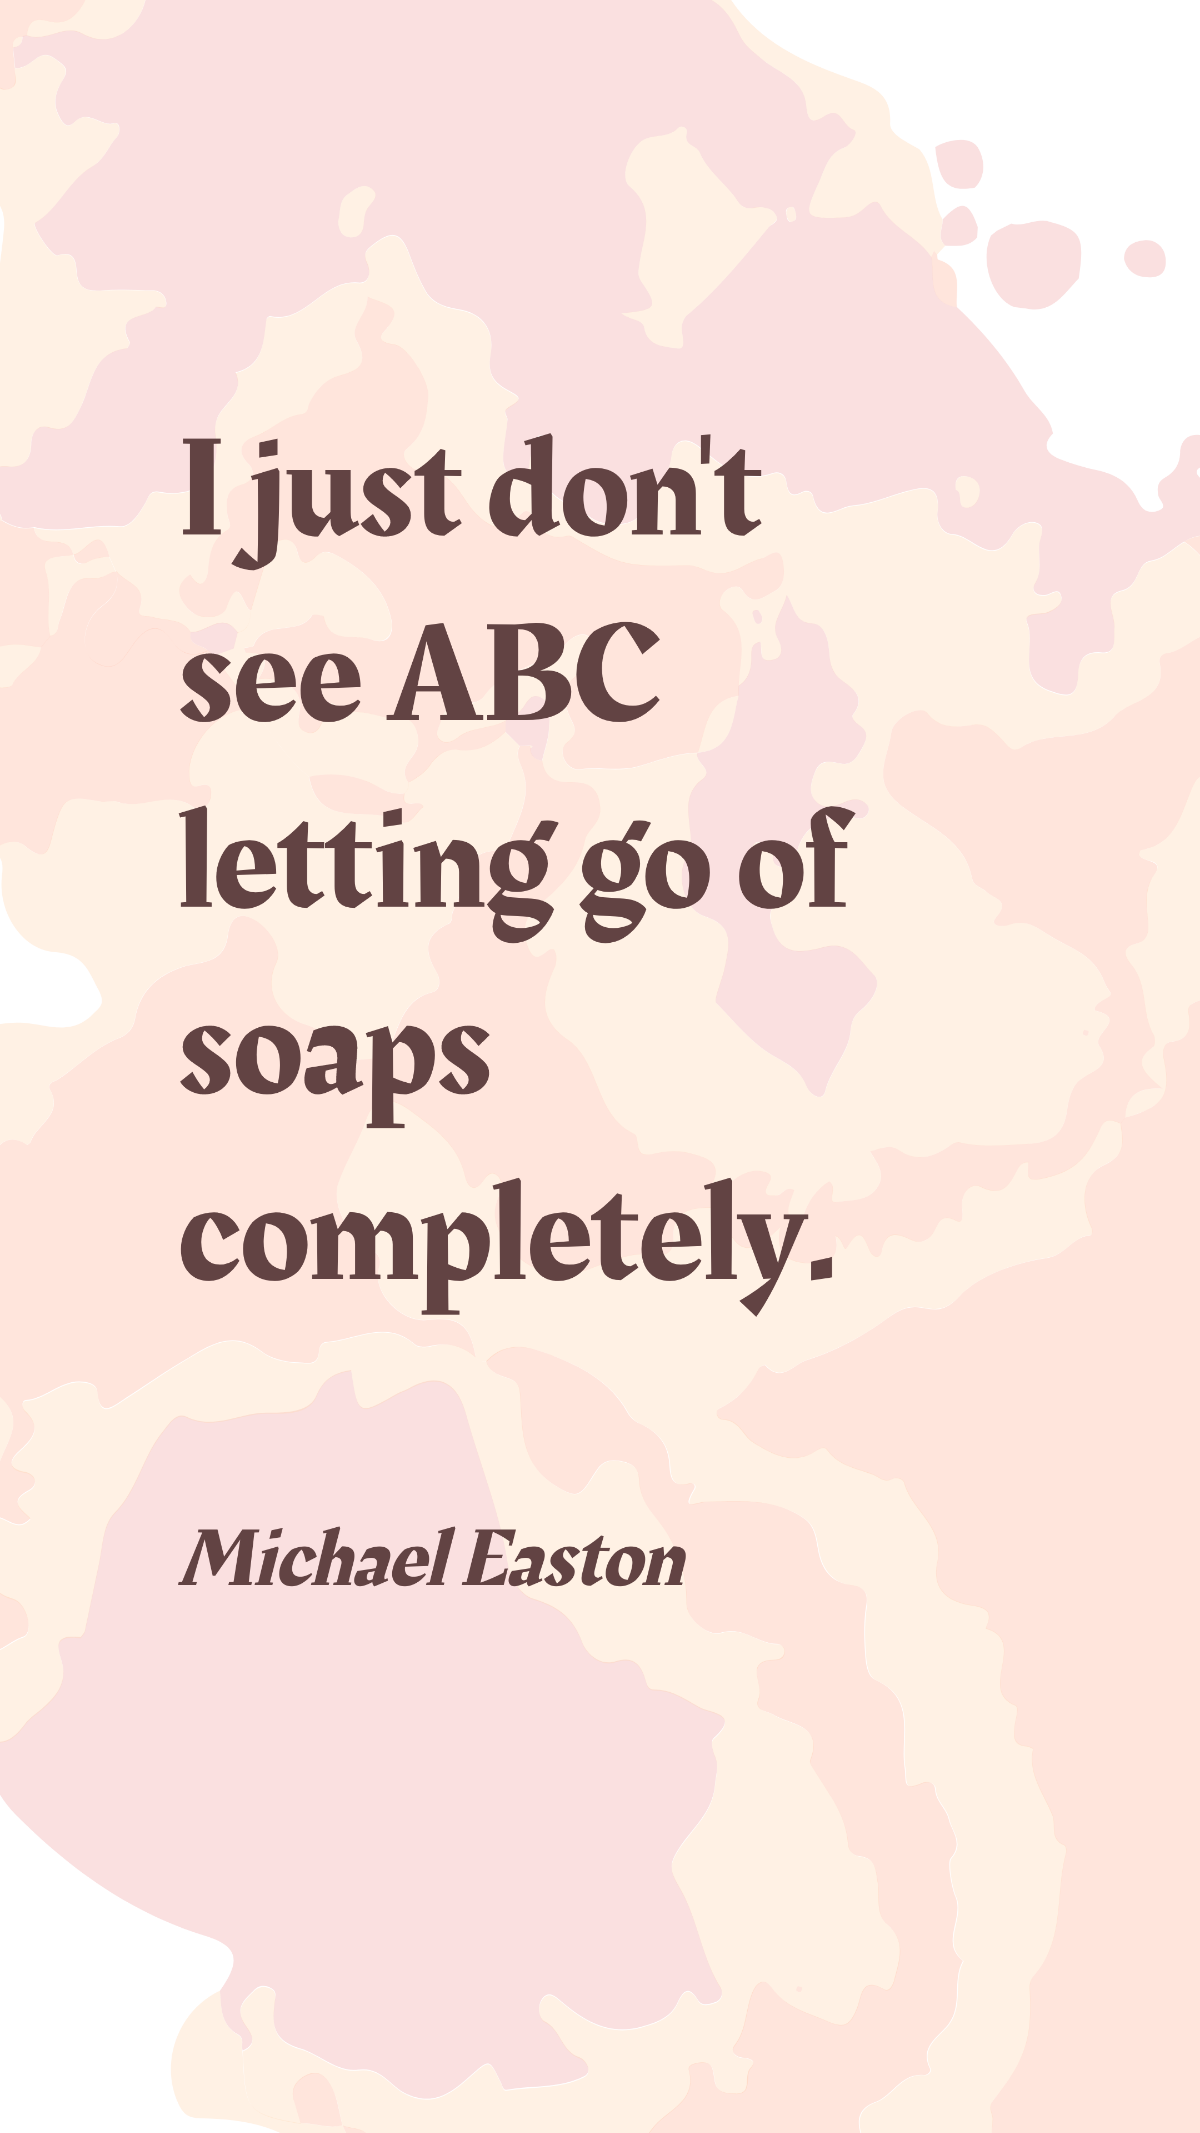 Michael Easton - I just don't see ABC letting go of soaps completely. Template